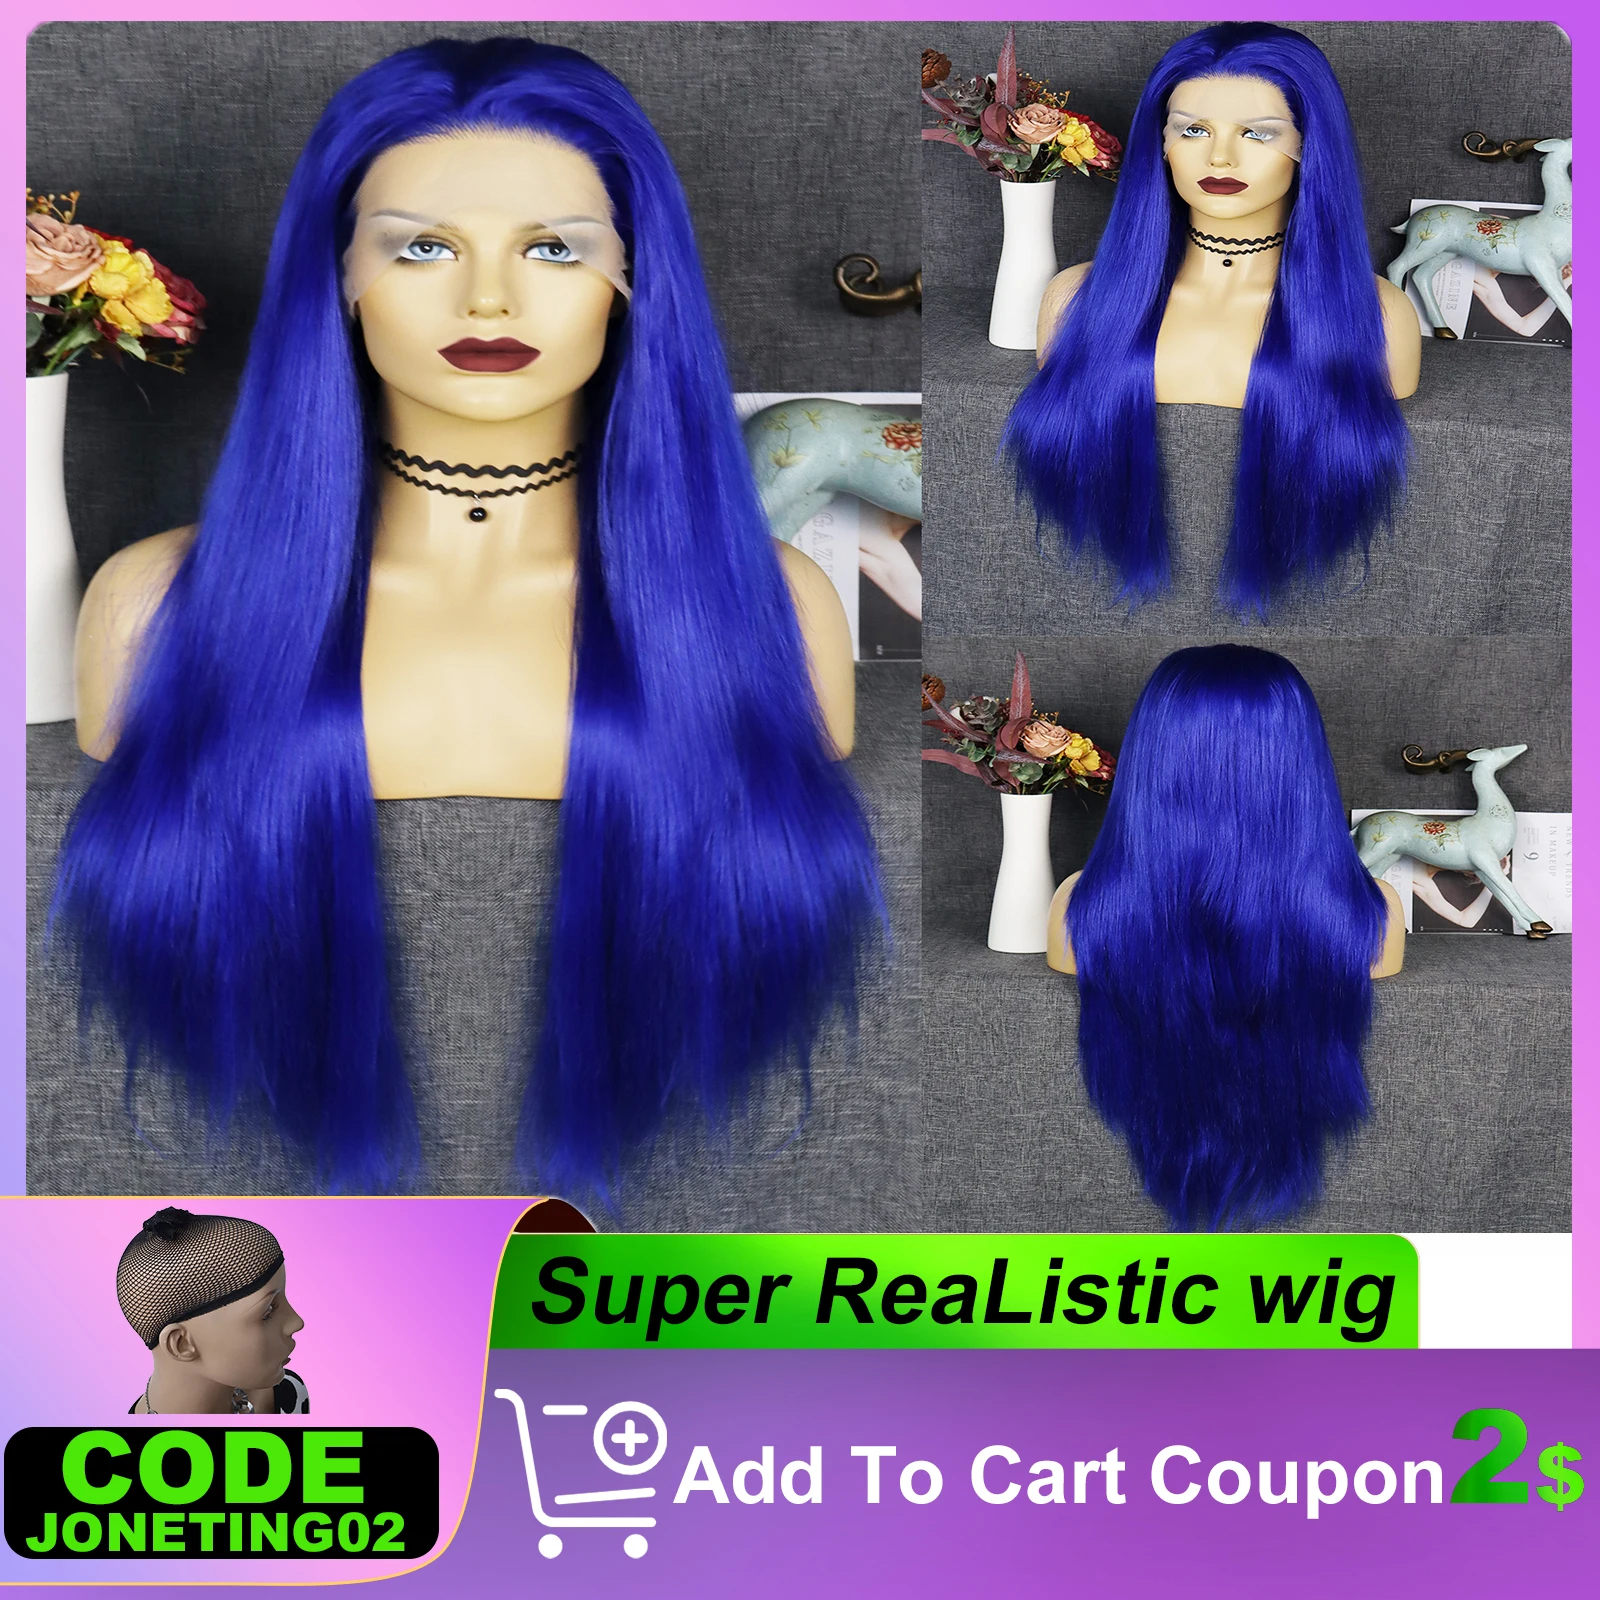 JONETING Synthetic Wigs 30IN 13x3 Lace Front Wig Deep Blue Straight Heat Resistant Fiber Hair for Women Cosplay Halloween Party